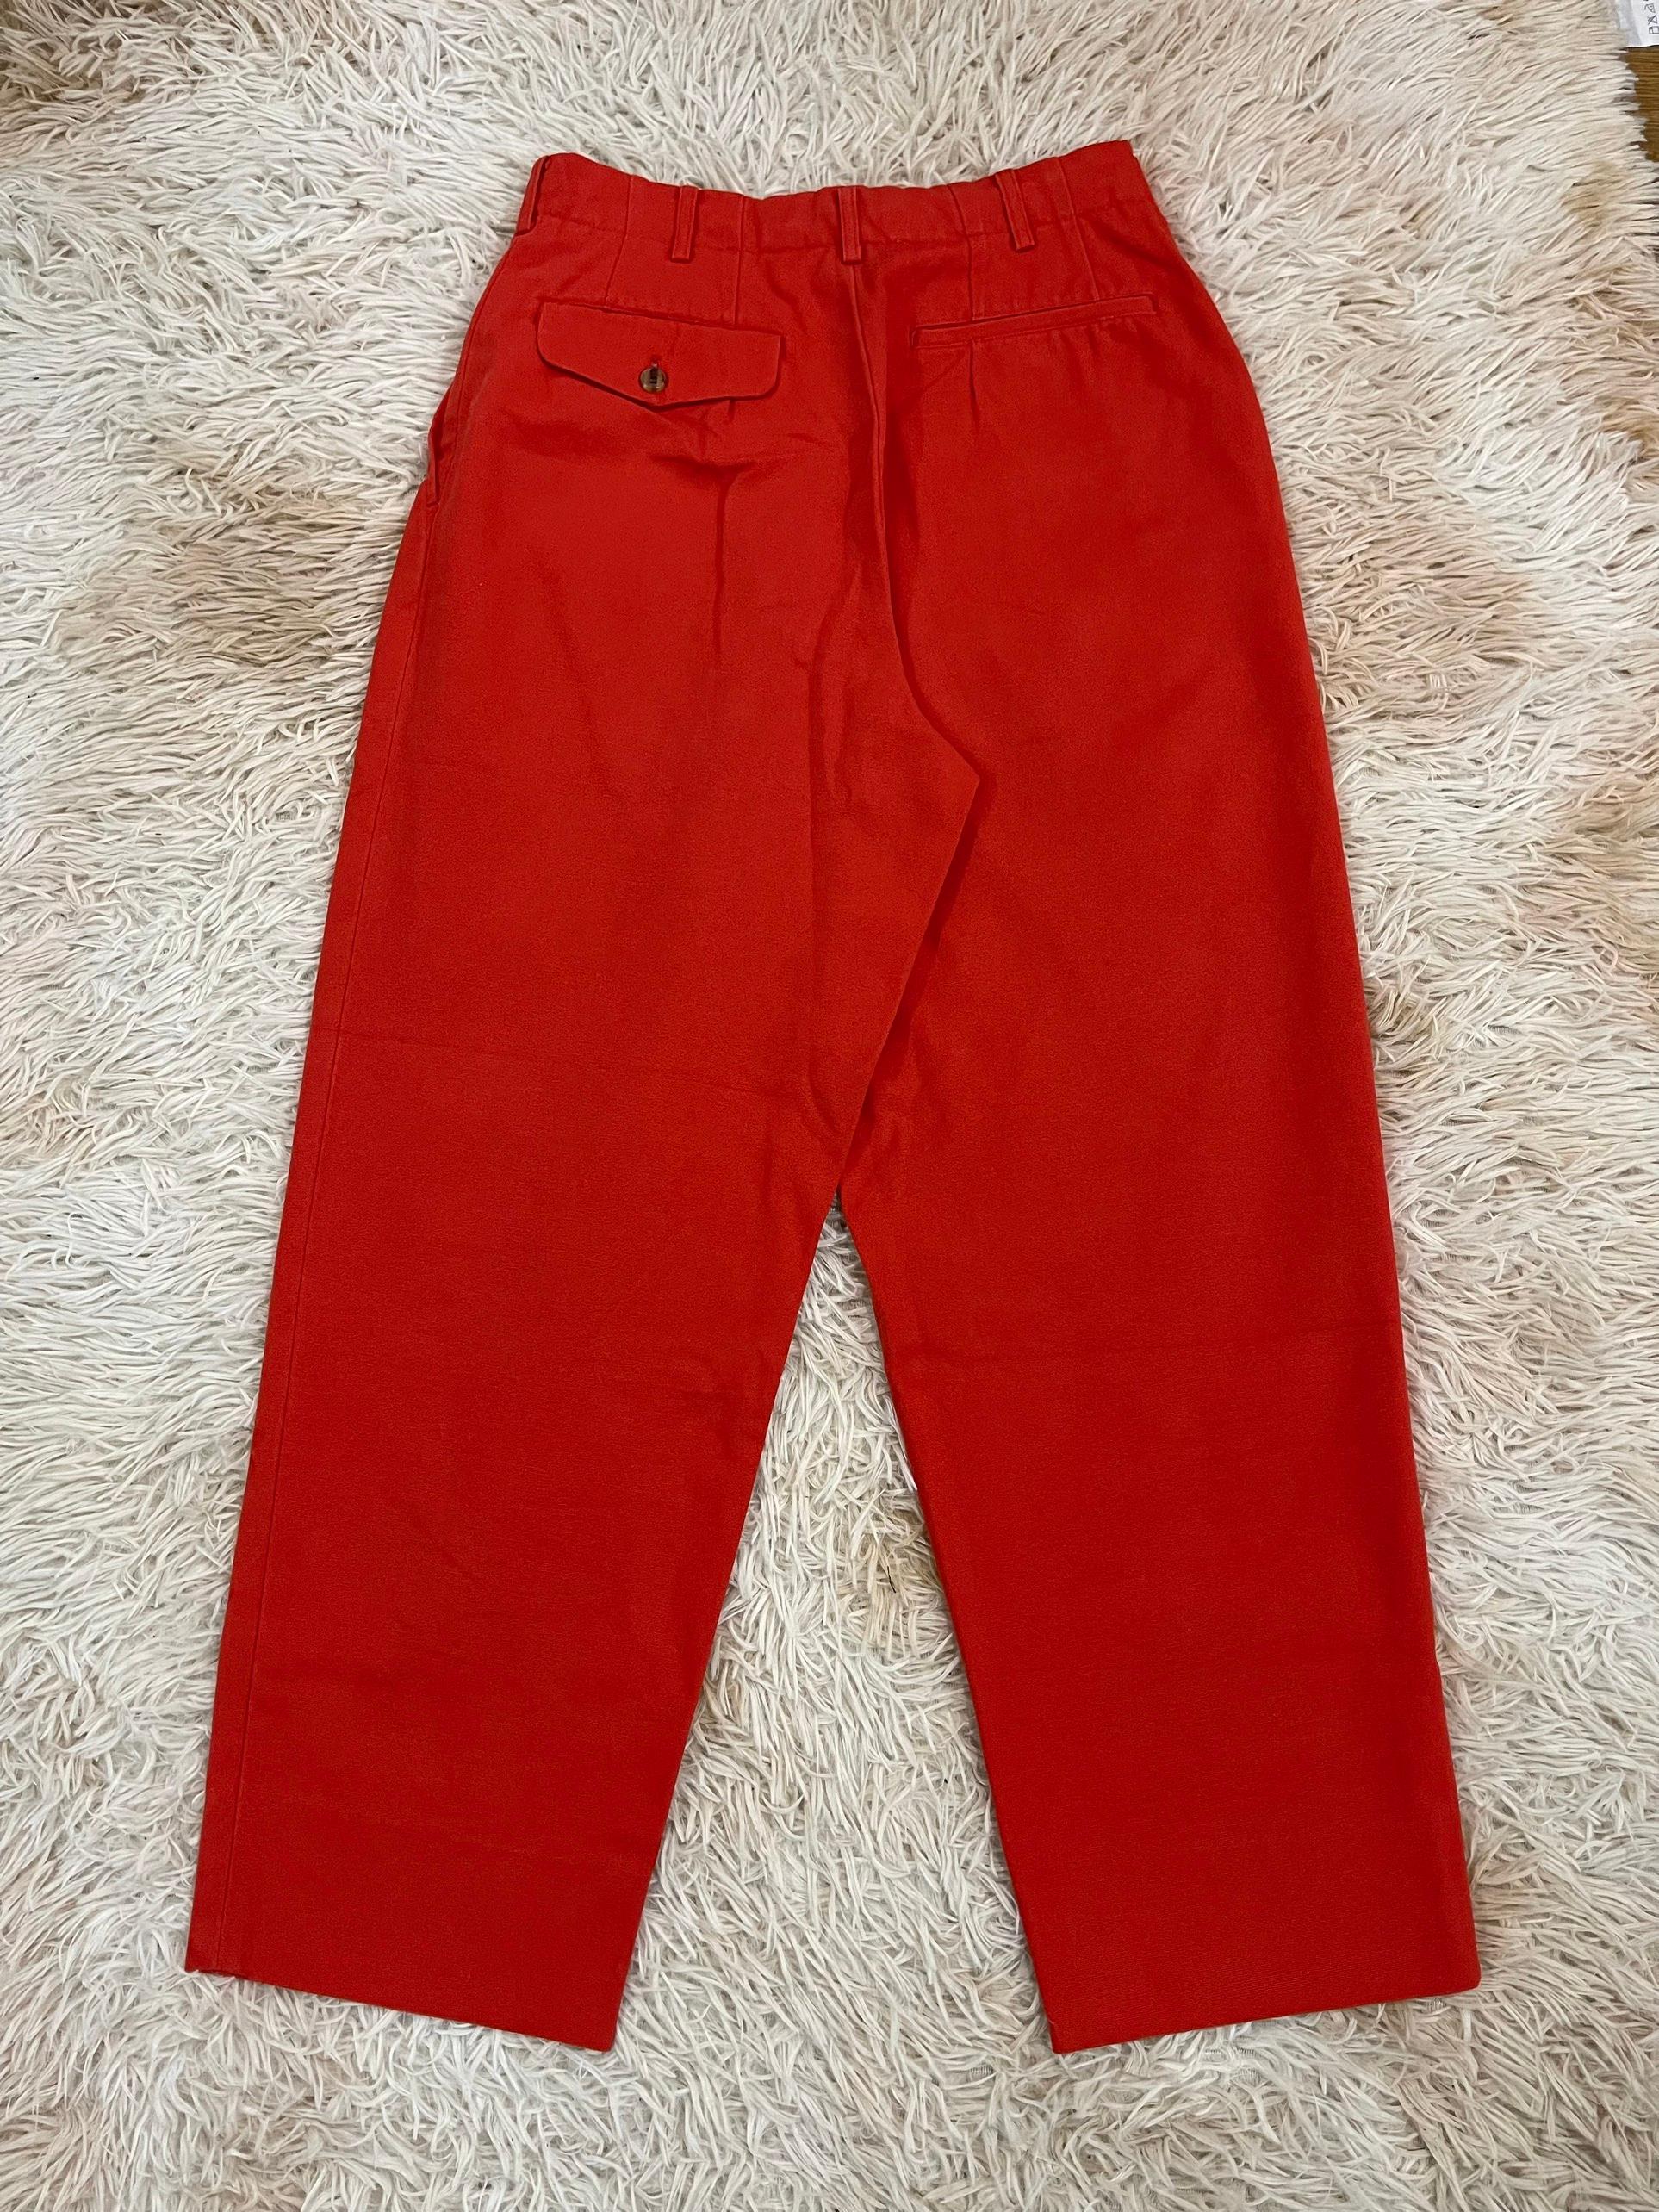 Comme Des Garcons HOMME A/W1991 Casual Red Pants In Excellent Condition For Sale In Seattle, WA